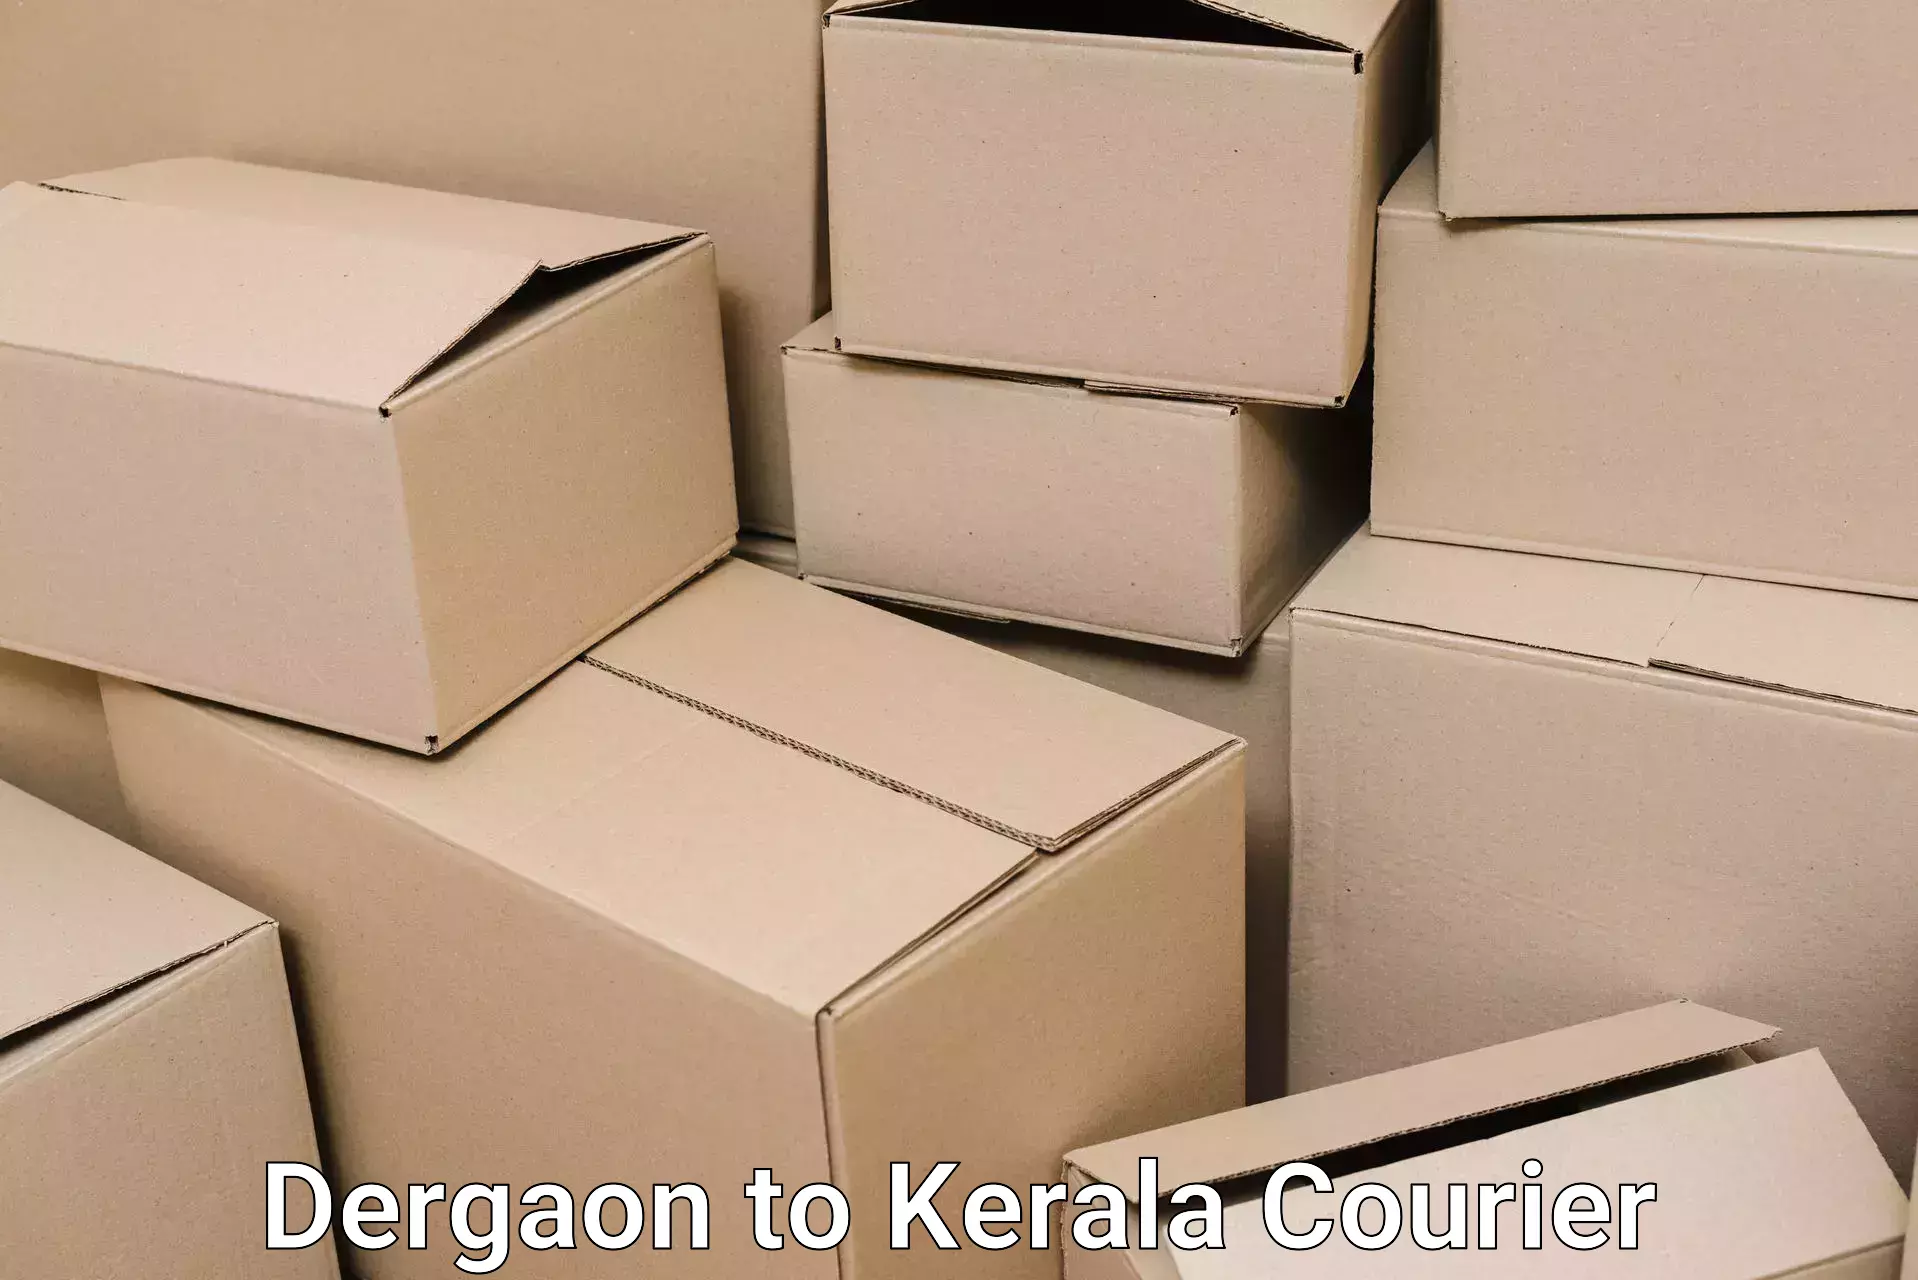 Dependable moving services Dergaon to Kerala